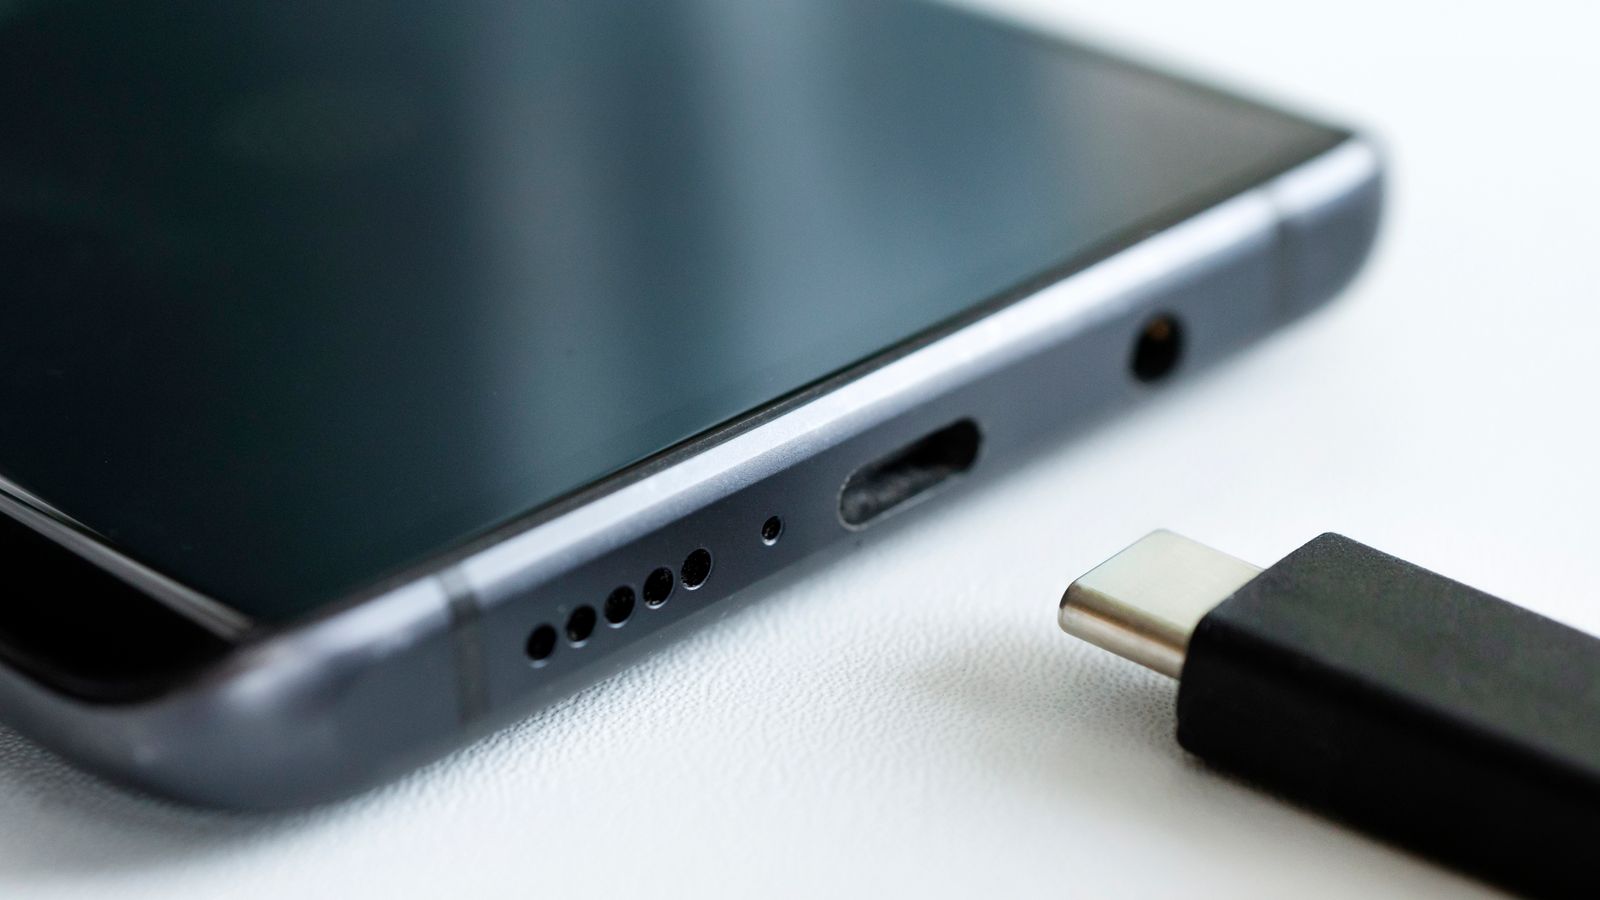 Phone chargers to be standardised across Europe from 2024 - forcing Apple to change to USB-C